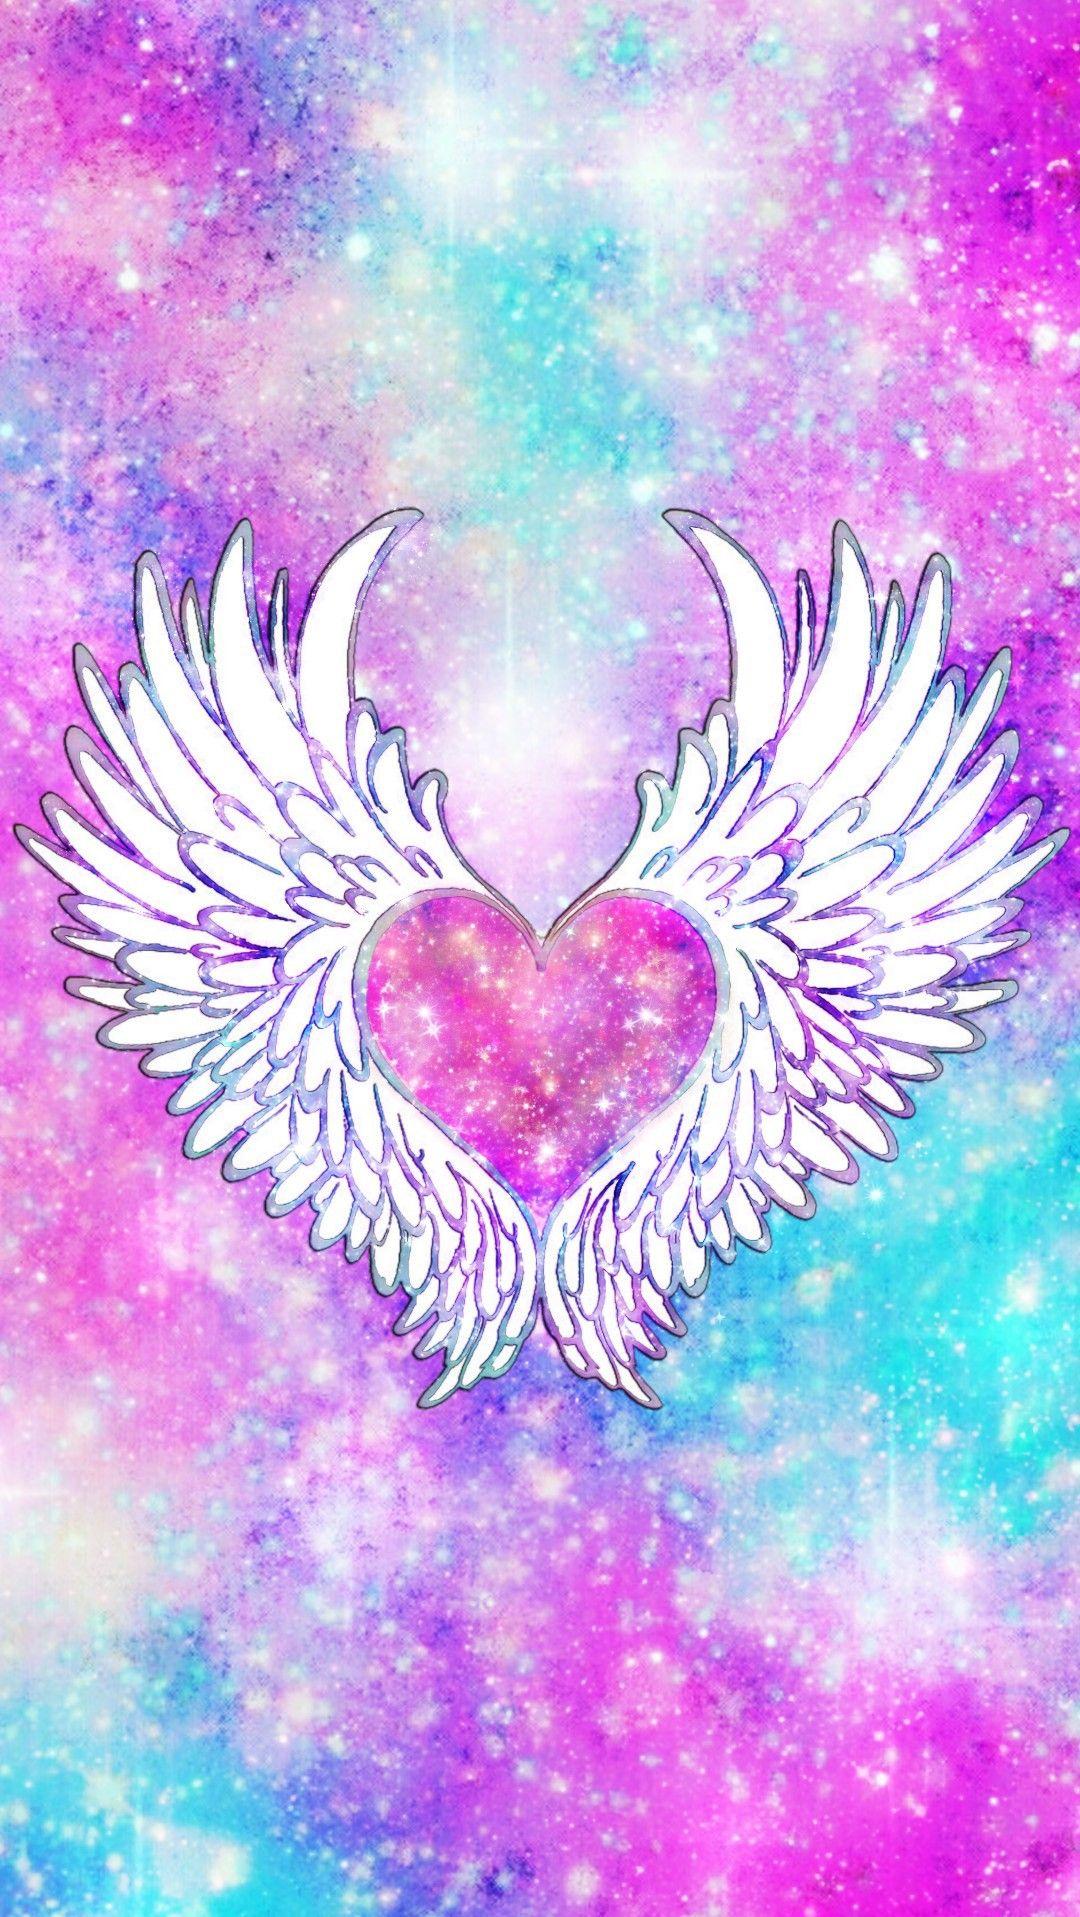 Wings Of Love Galaxy, made by me #pink #galaxy #wallpaper #background #sparkles #glittery #art #cute #win. Love wallpaper, Heart wallpaper, Wallpaper background